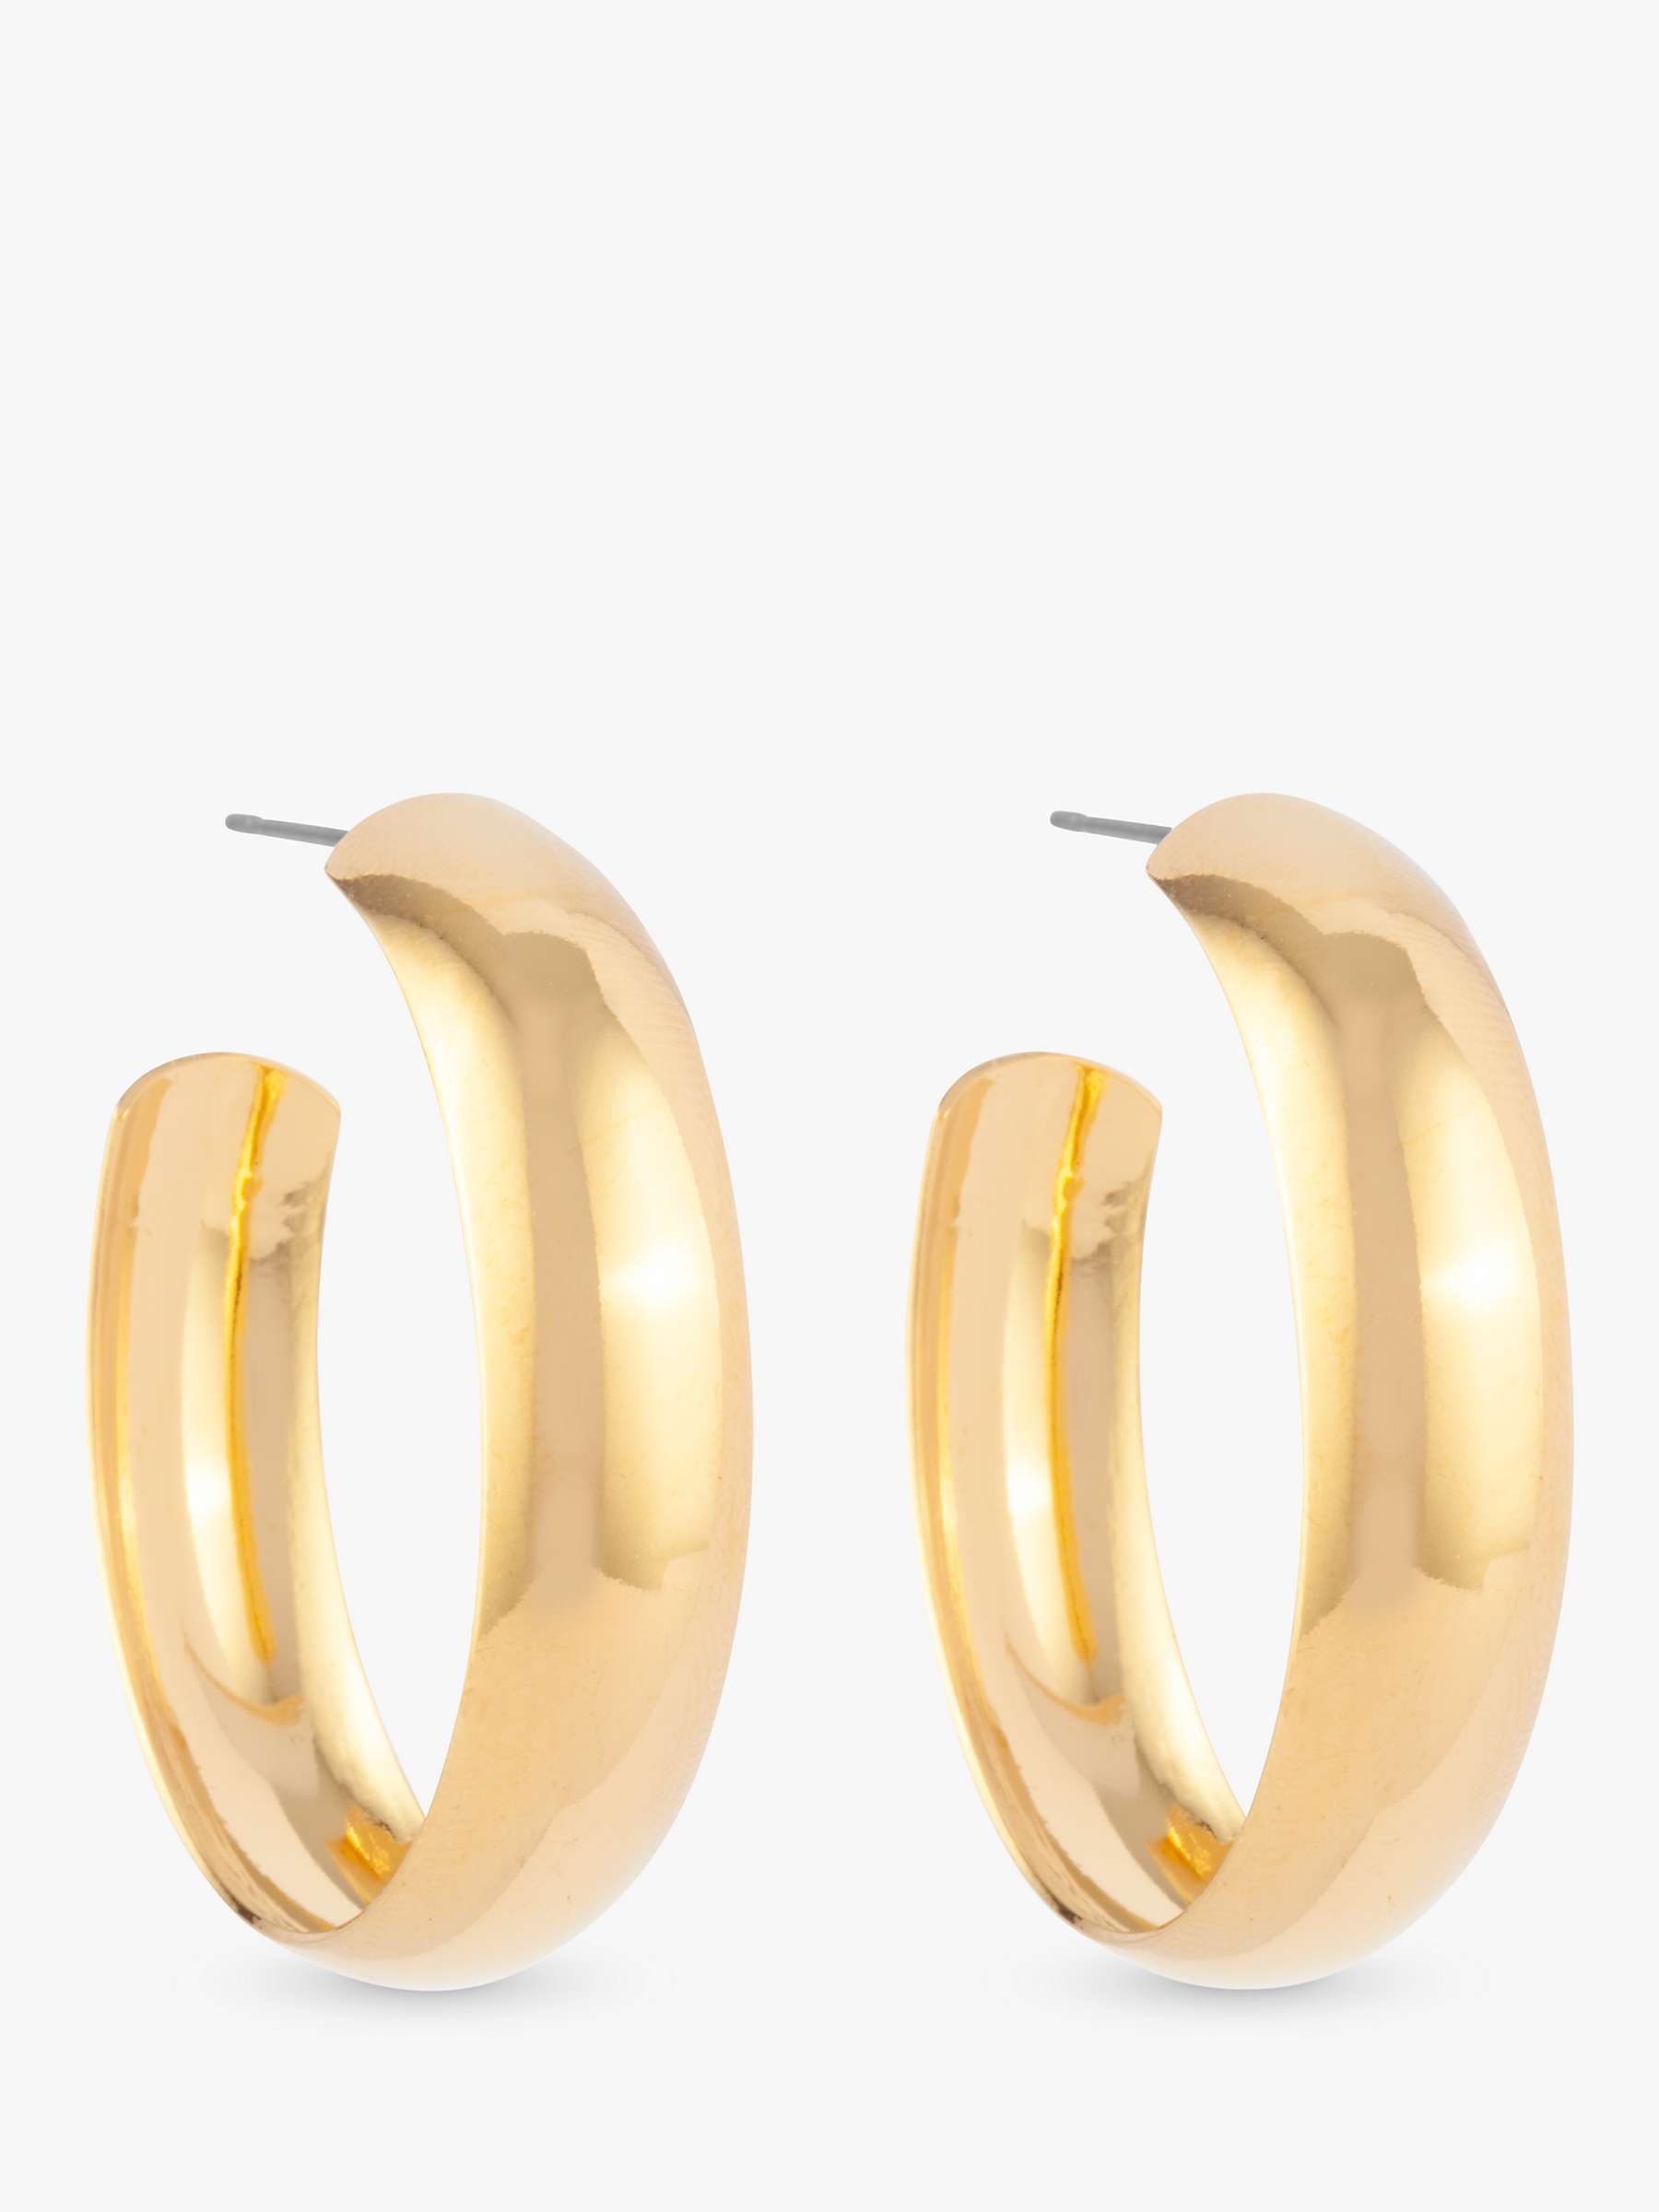 Buy Susan Caplan Vintage Rediscovered Collection Gold Plated Hoop Earrings, Gold Online at johnlewis.com